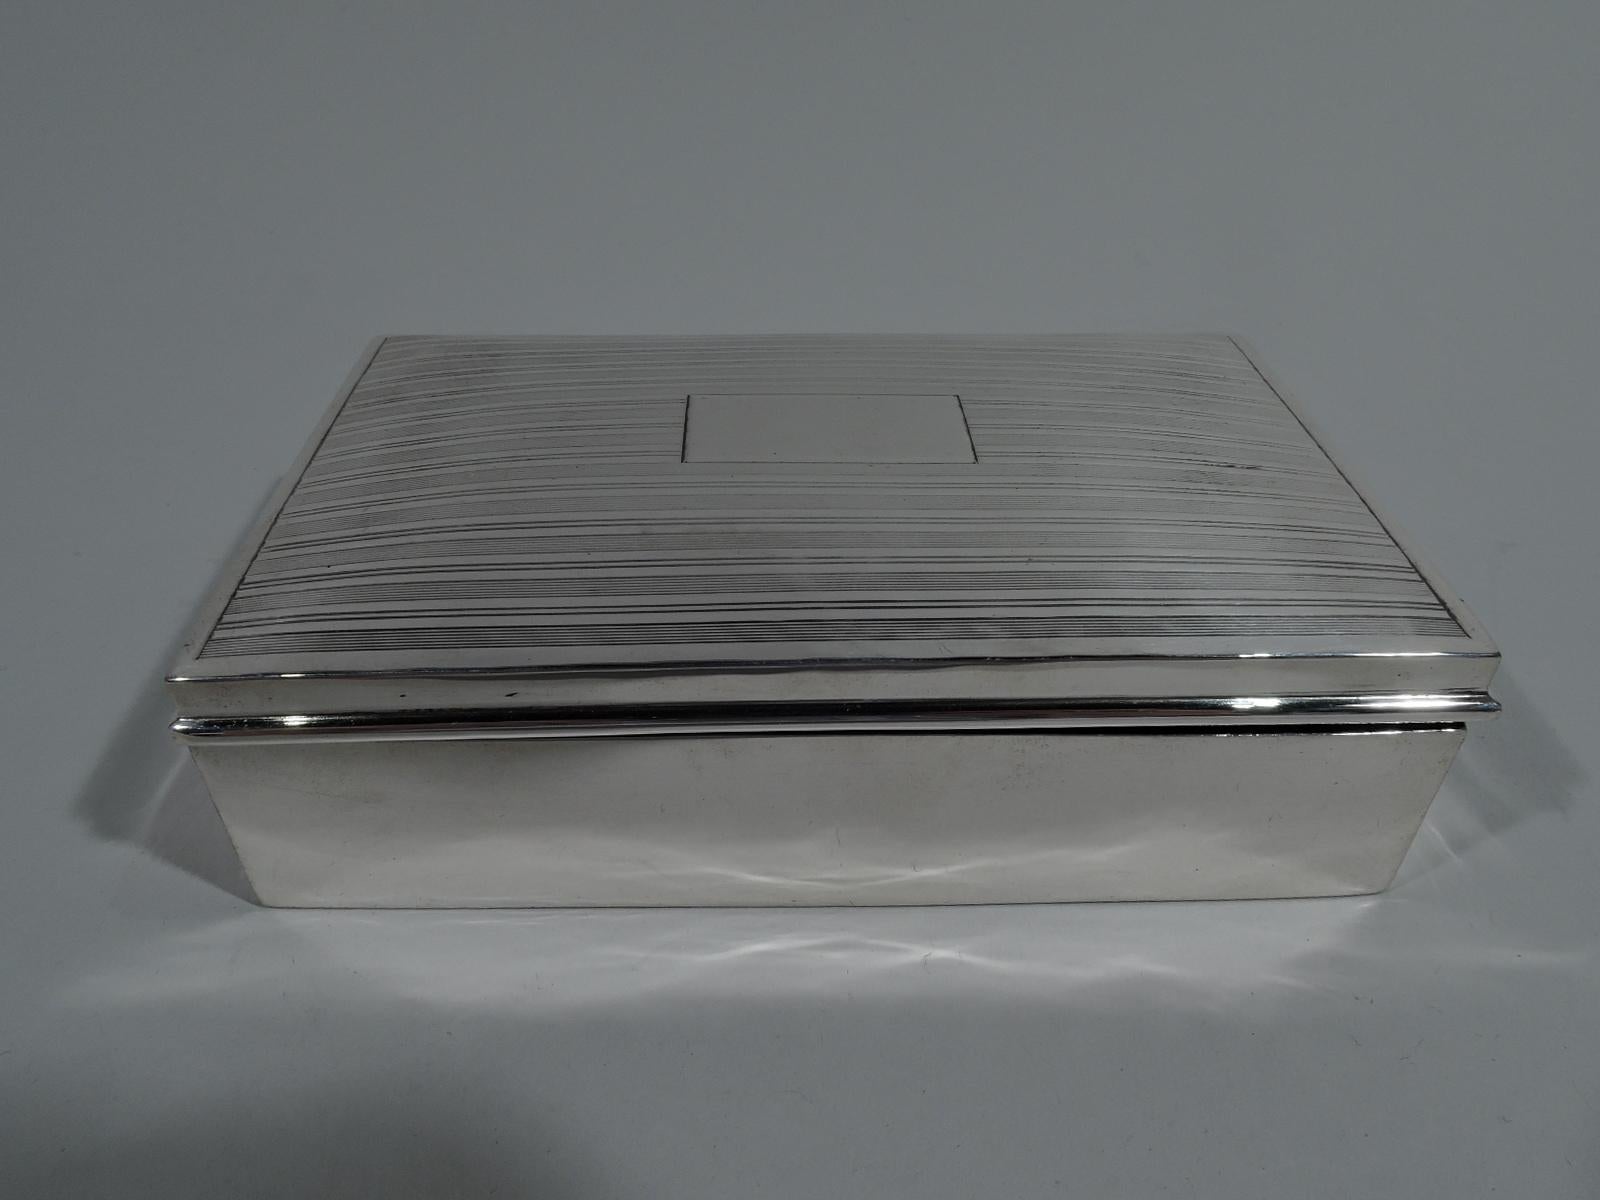 American Art Deco sterling silver keepsake box, circa 1920. Rectangular with straight sides. Cover hinged and gently curved with molded rim. Cover top has horizontal linear ornament with plain lines alternating with engine-turned ones, and central